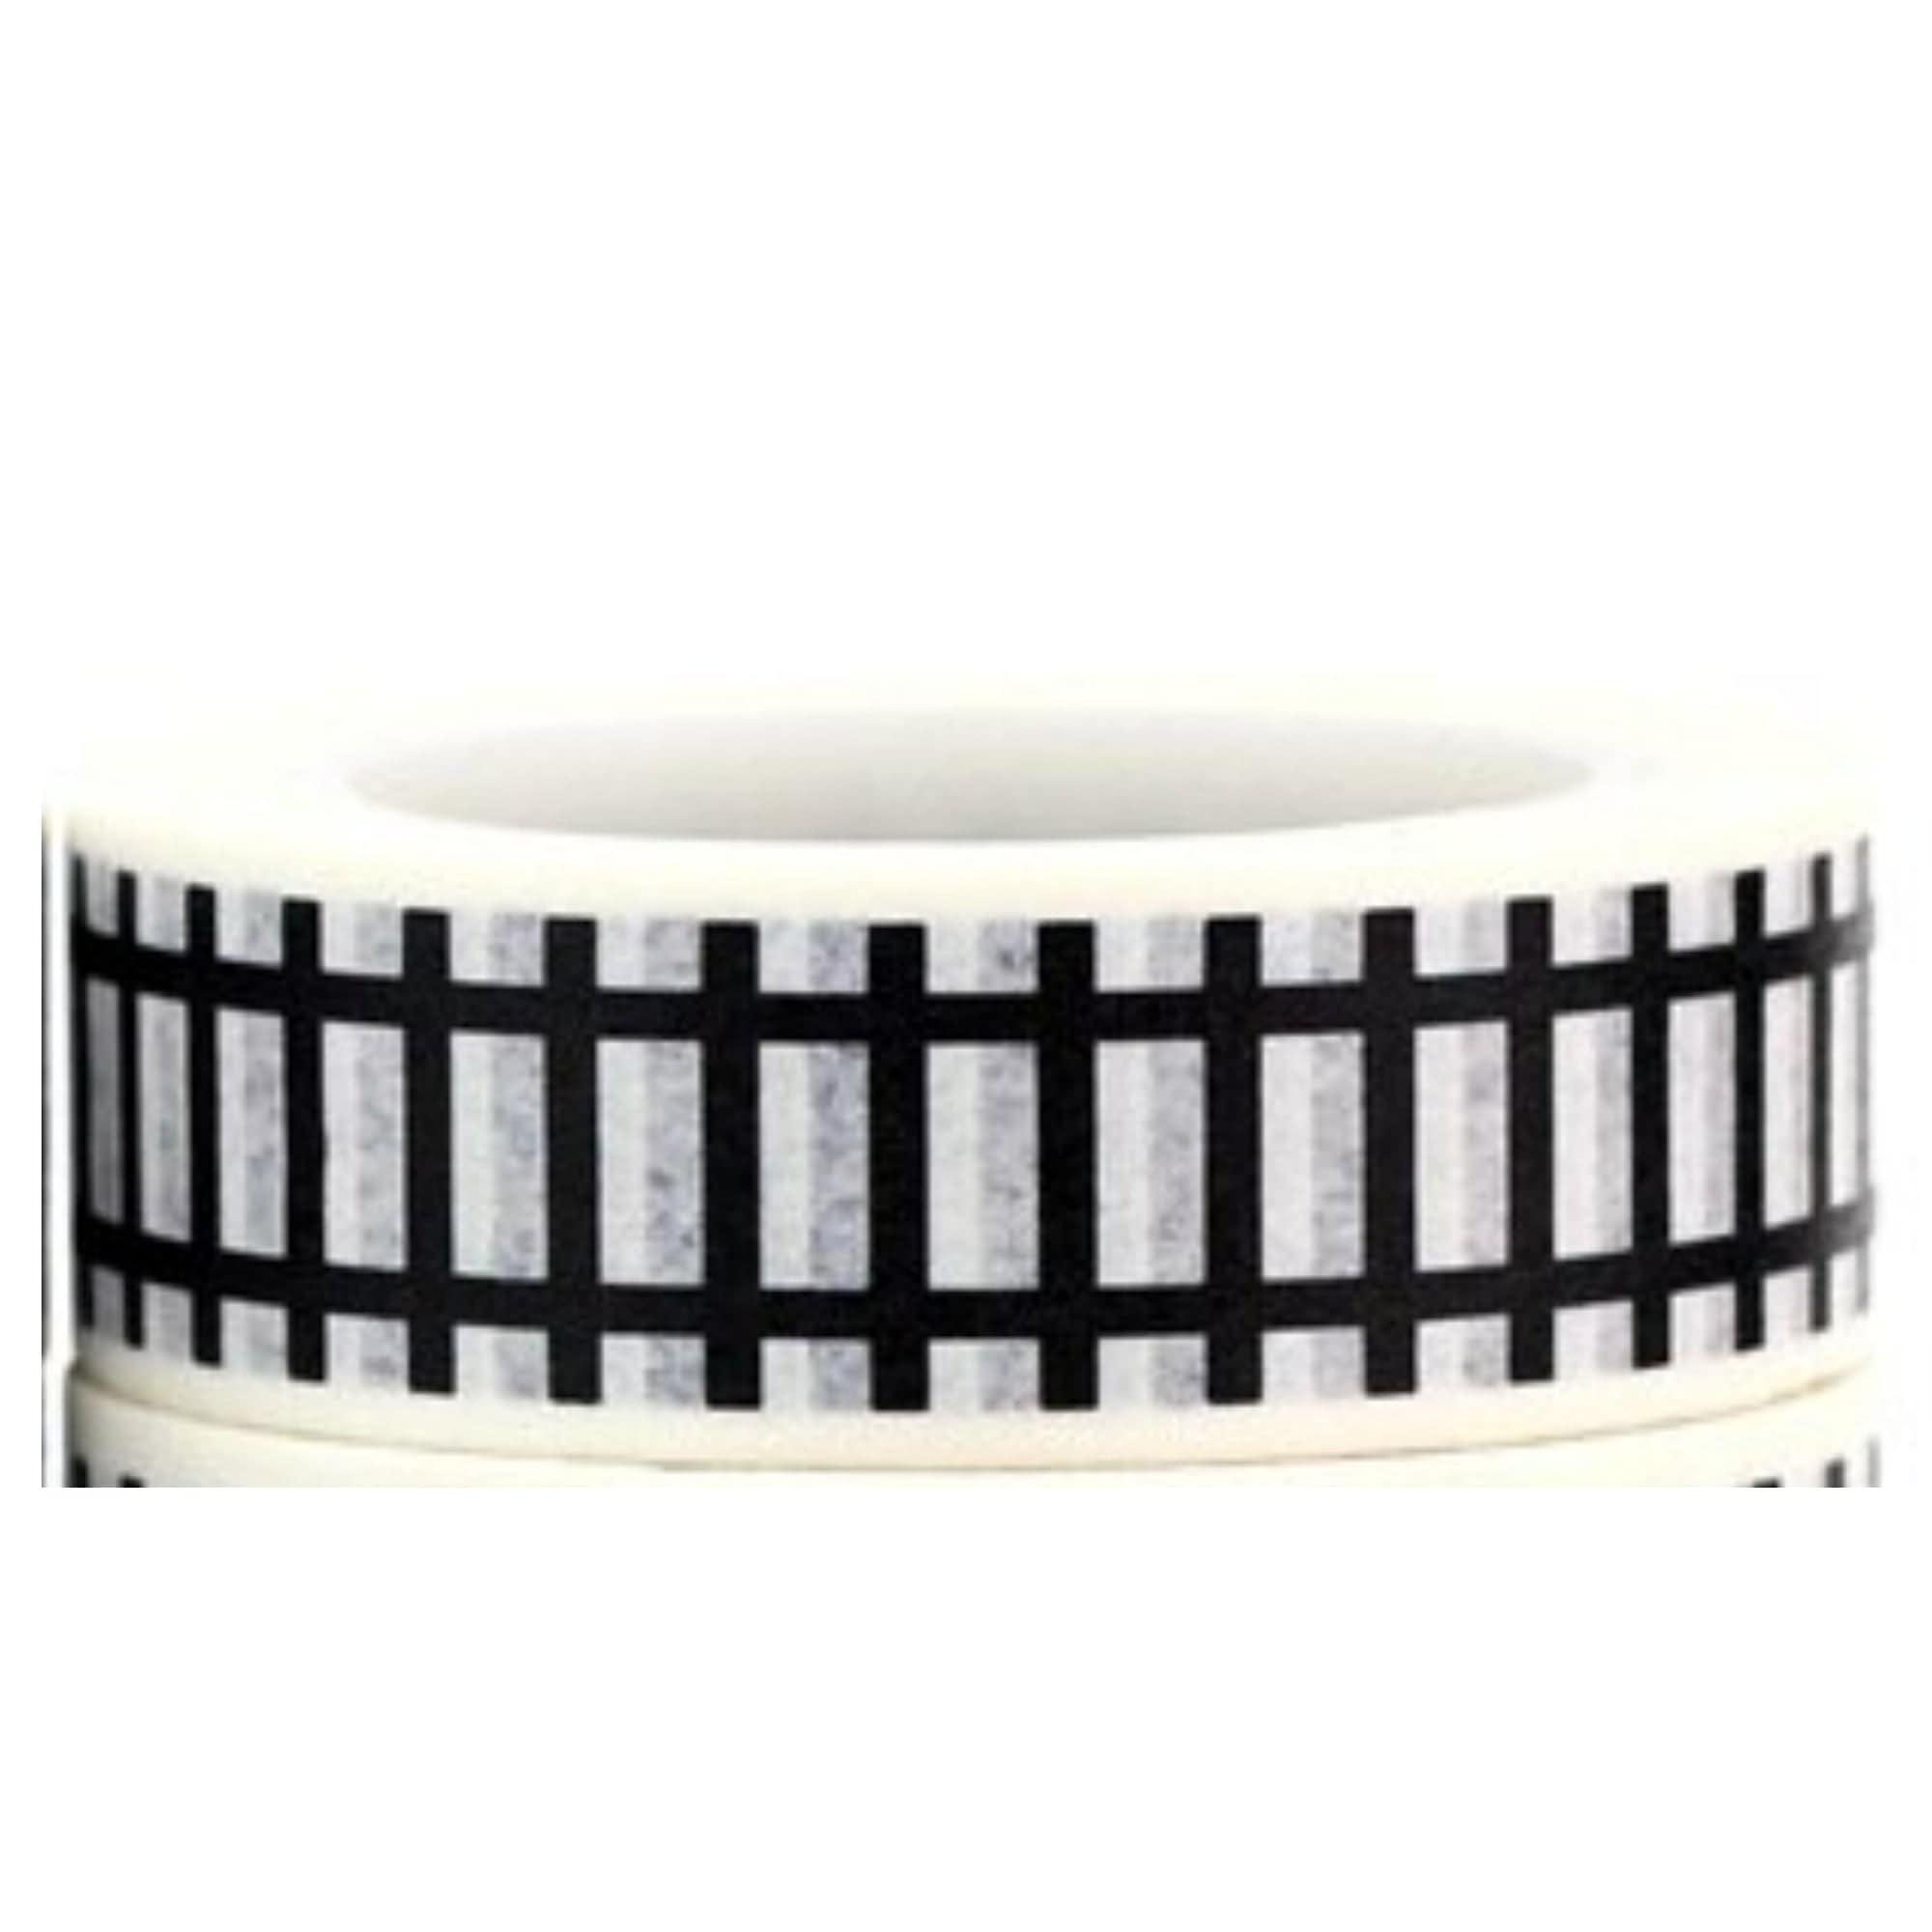 TW Collection Railroad Tracks Washi Tape by SSC Designs - 15mm x 30 Feet